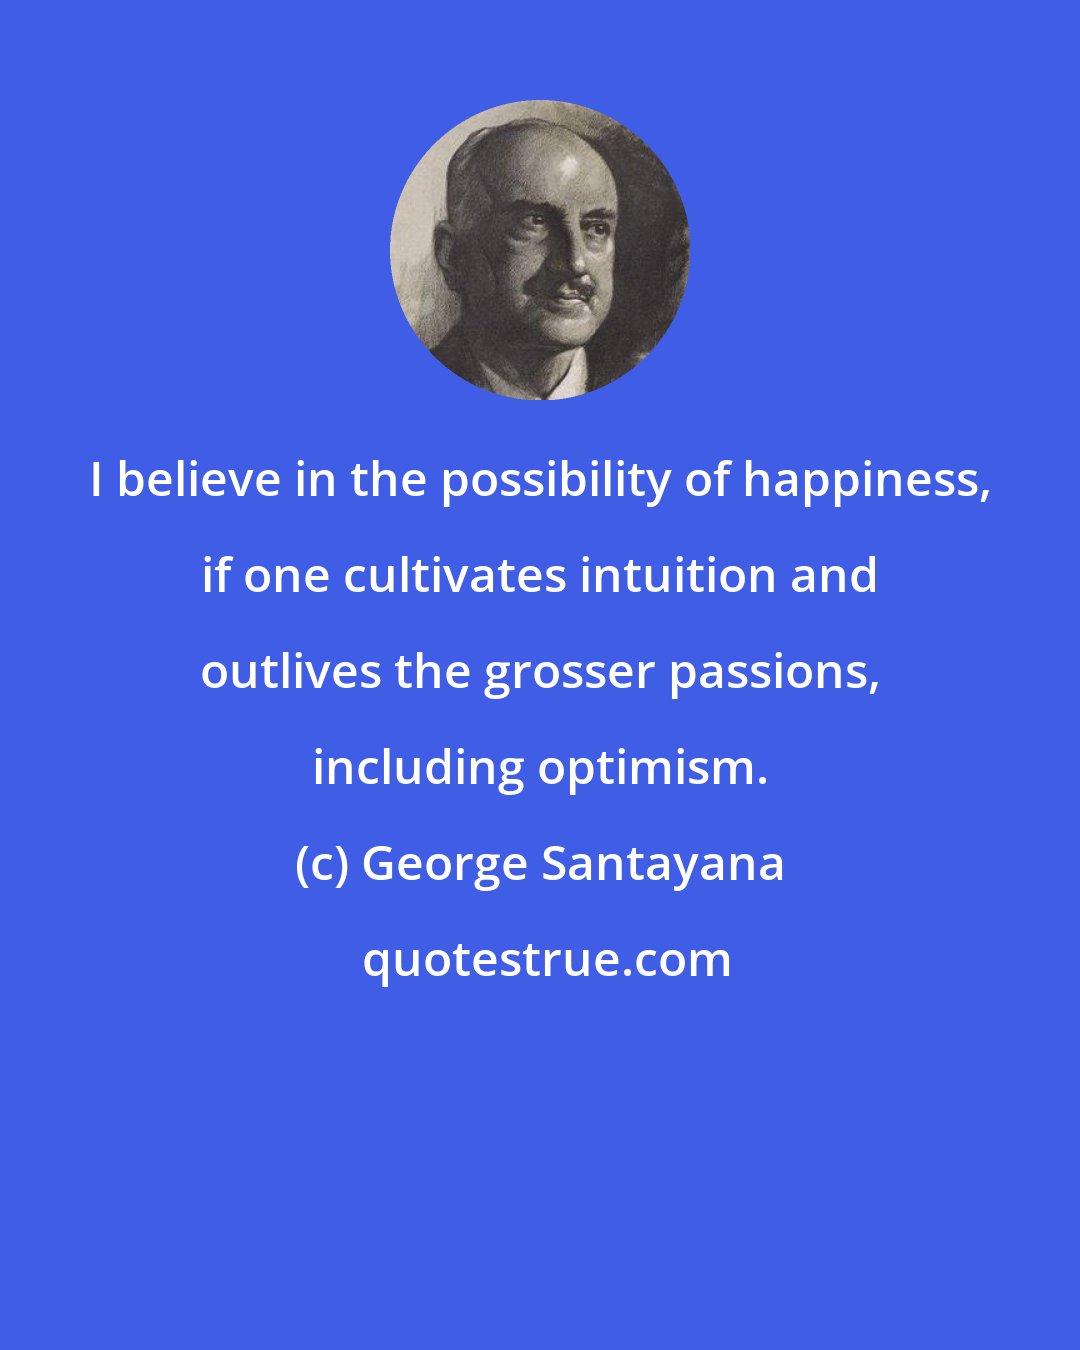 George Santayana: I believe in the possibility of happiness, if one cultivates intuition and outlives the grosser passions, including optimism.